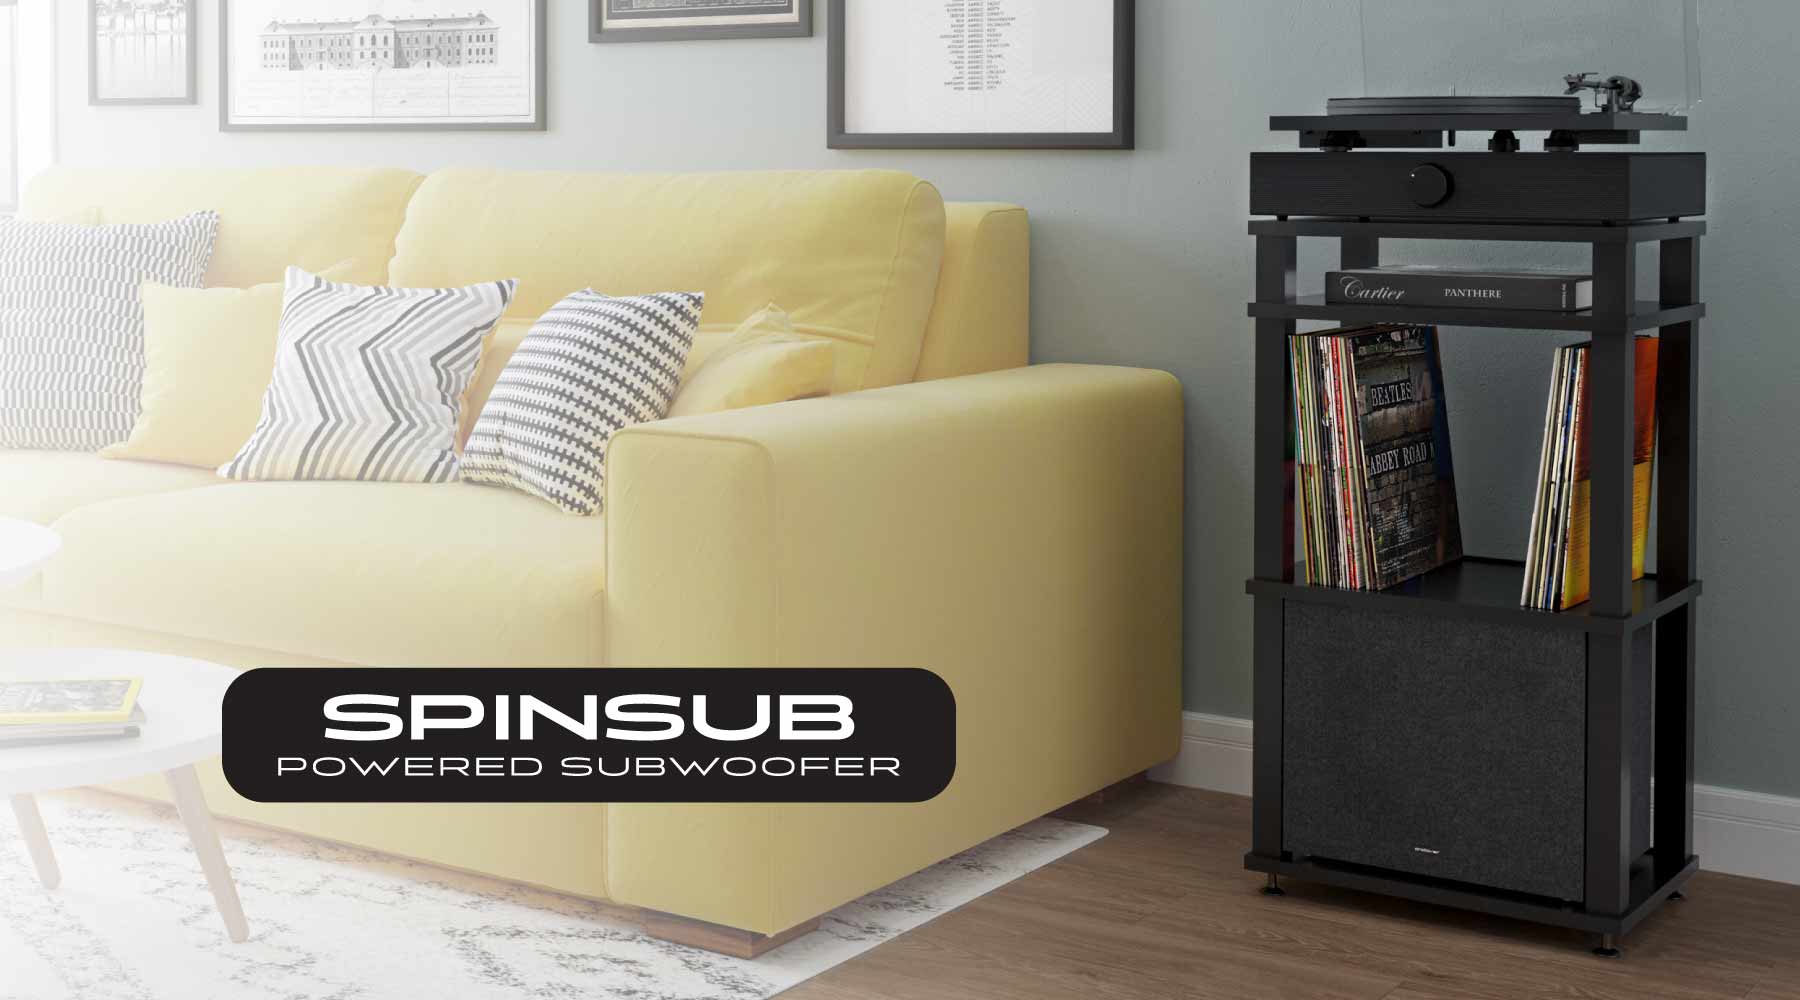 New SpinSub Subwoofer by Andover Audio